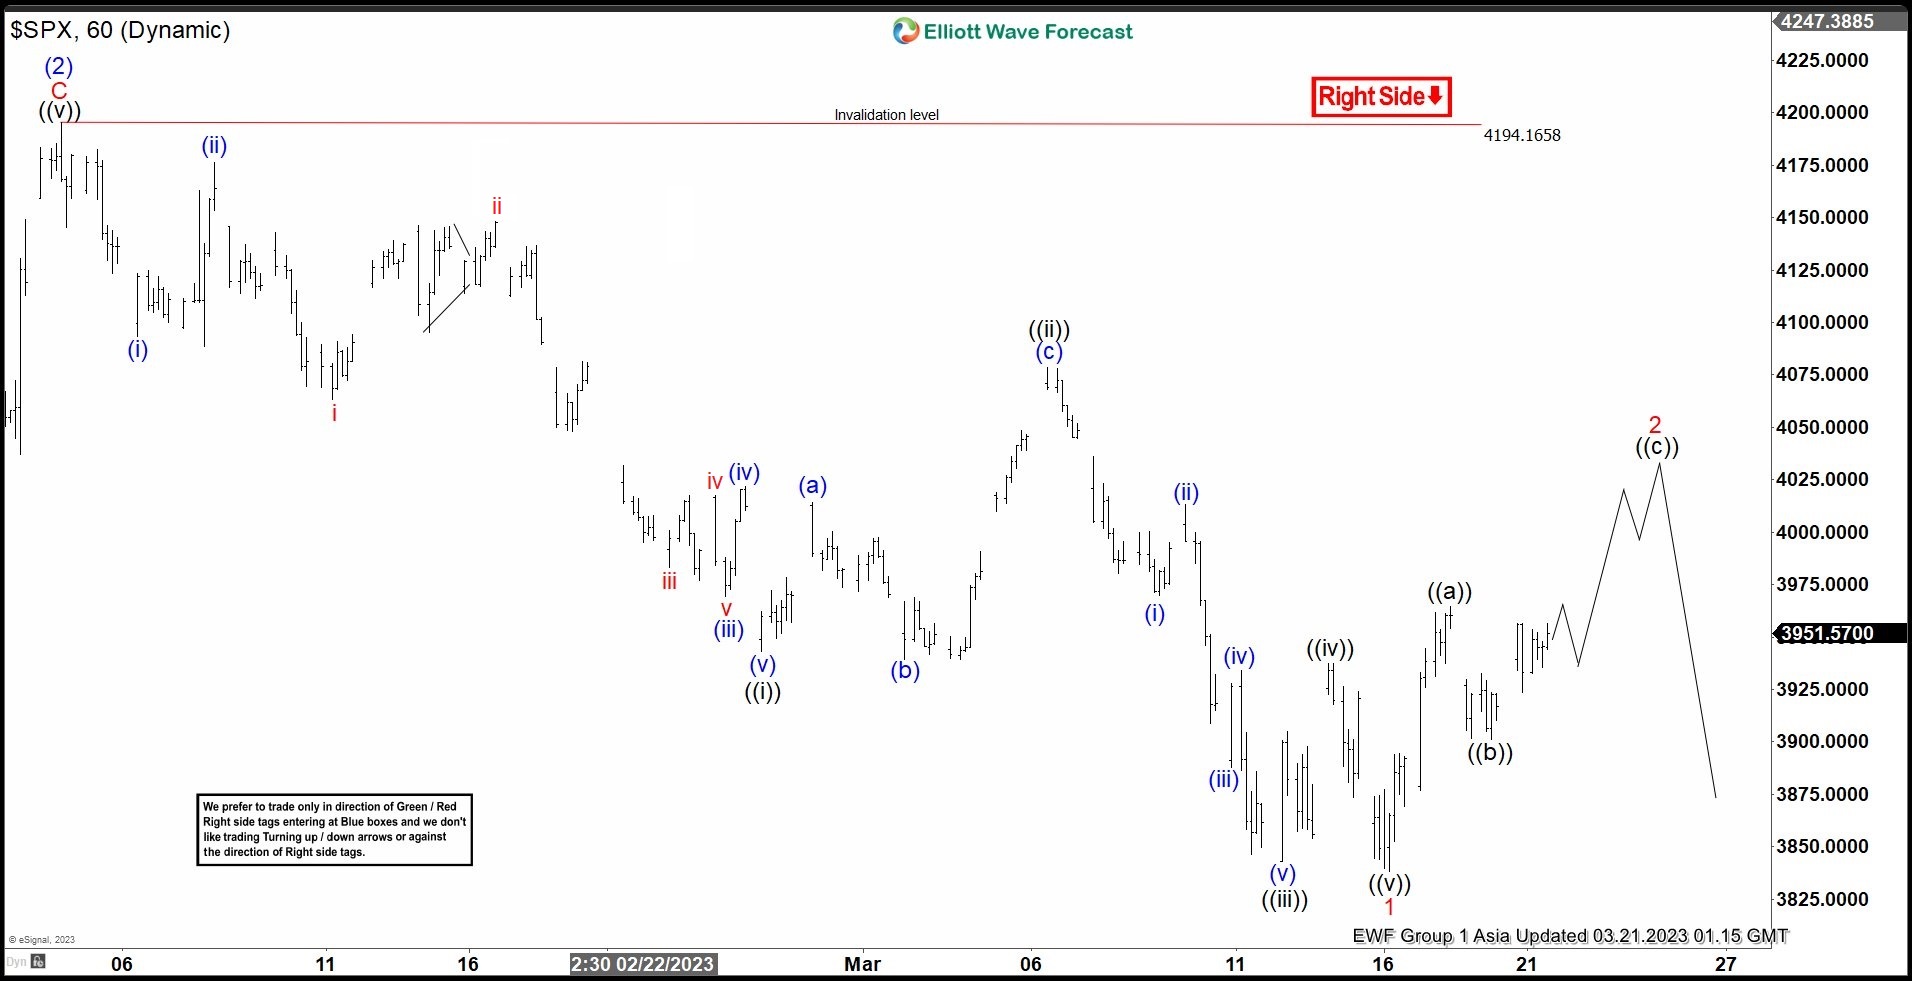 Rally in $SPX Expected to Fail According to Elliott Wave